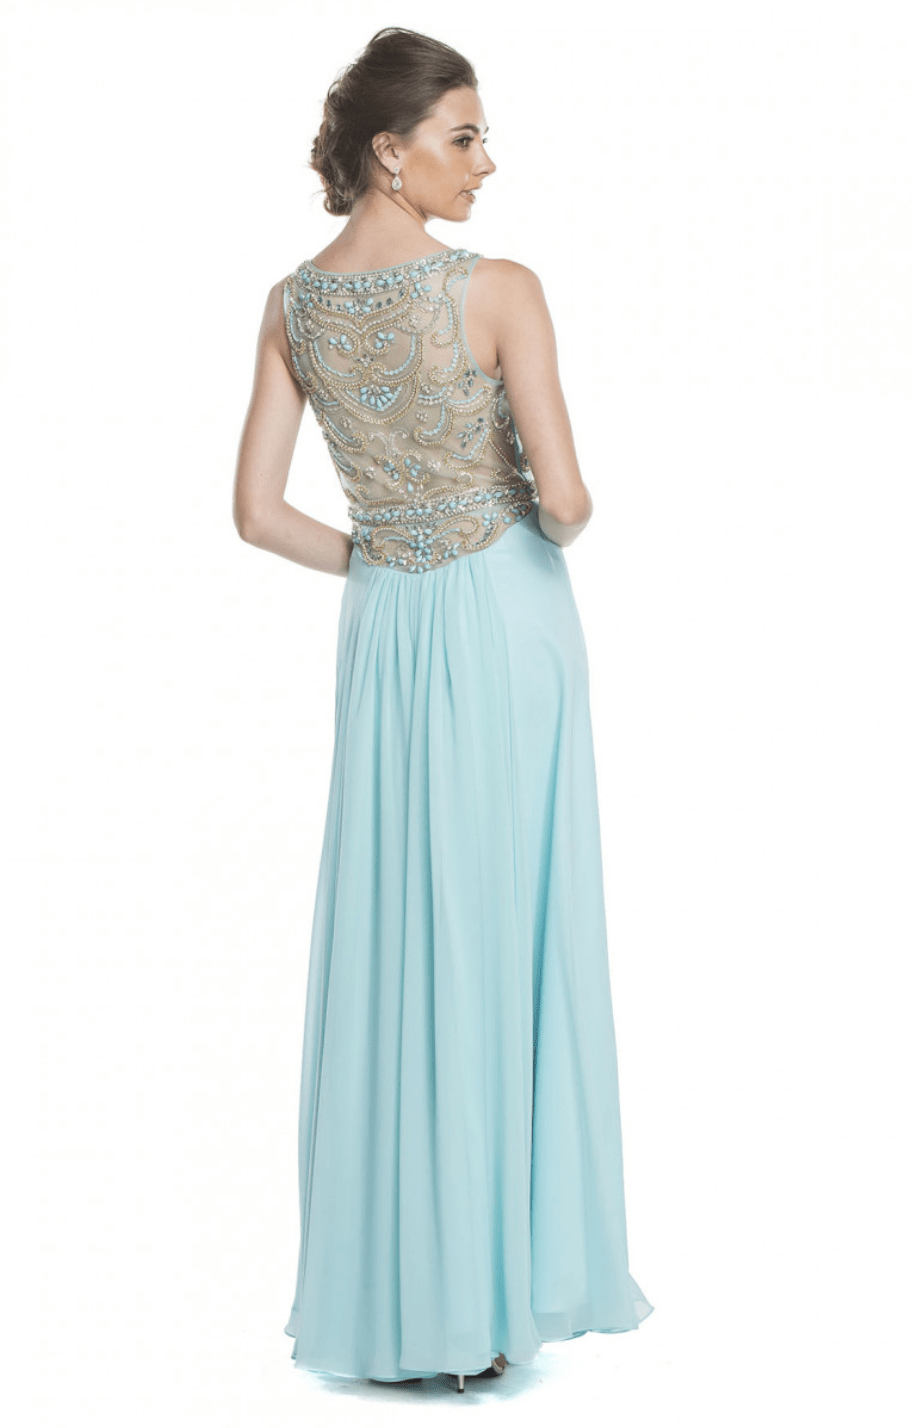 Sparkling Crystal Beaded Chiffon Dress by Aspeed - NORMA REED